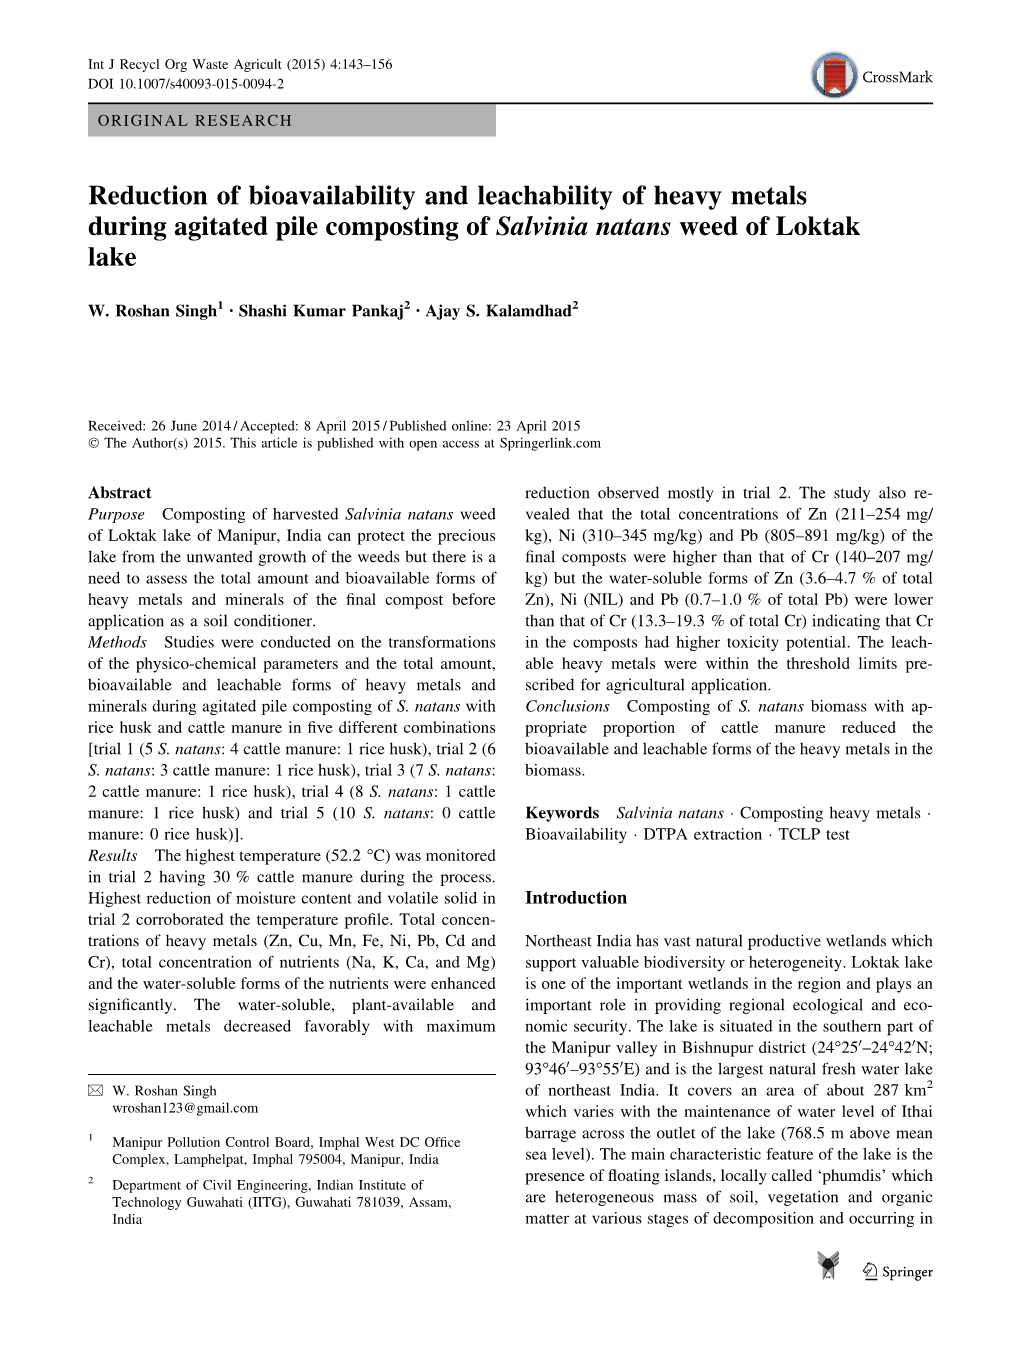 Reduction of Bioavailability and Leachability of Heavy Metals During Agitated Pile Composting of Salvinia Natans Weed of Loktak Lake